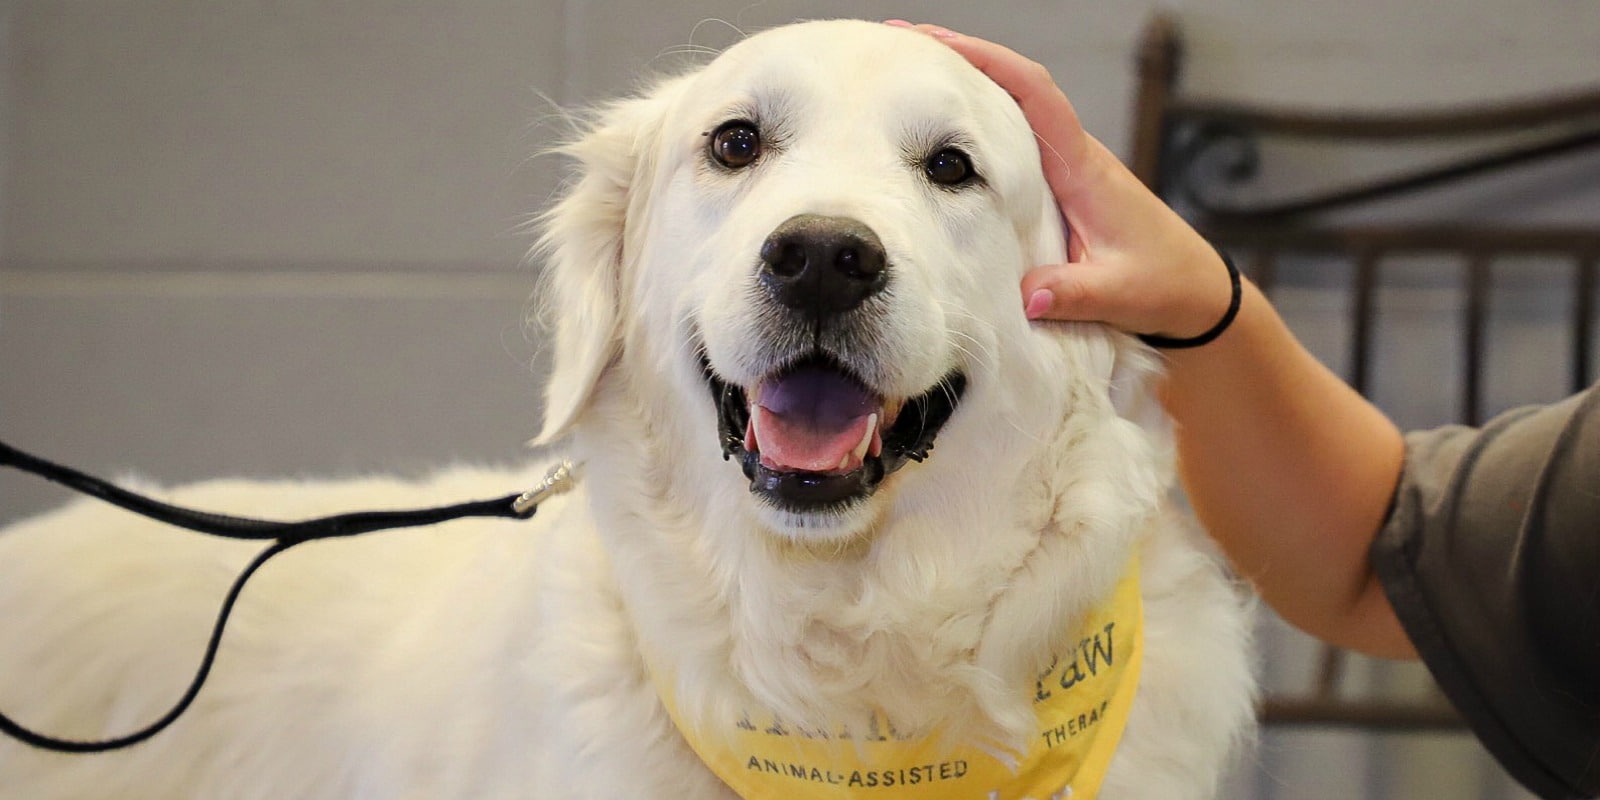 Hand in Paw brings comfort and joy through Animal-Assisted Therapy 